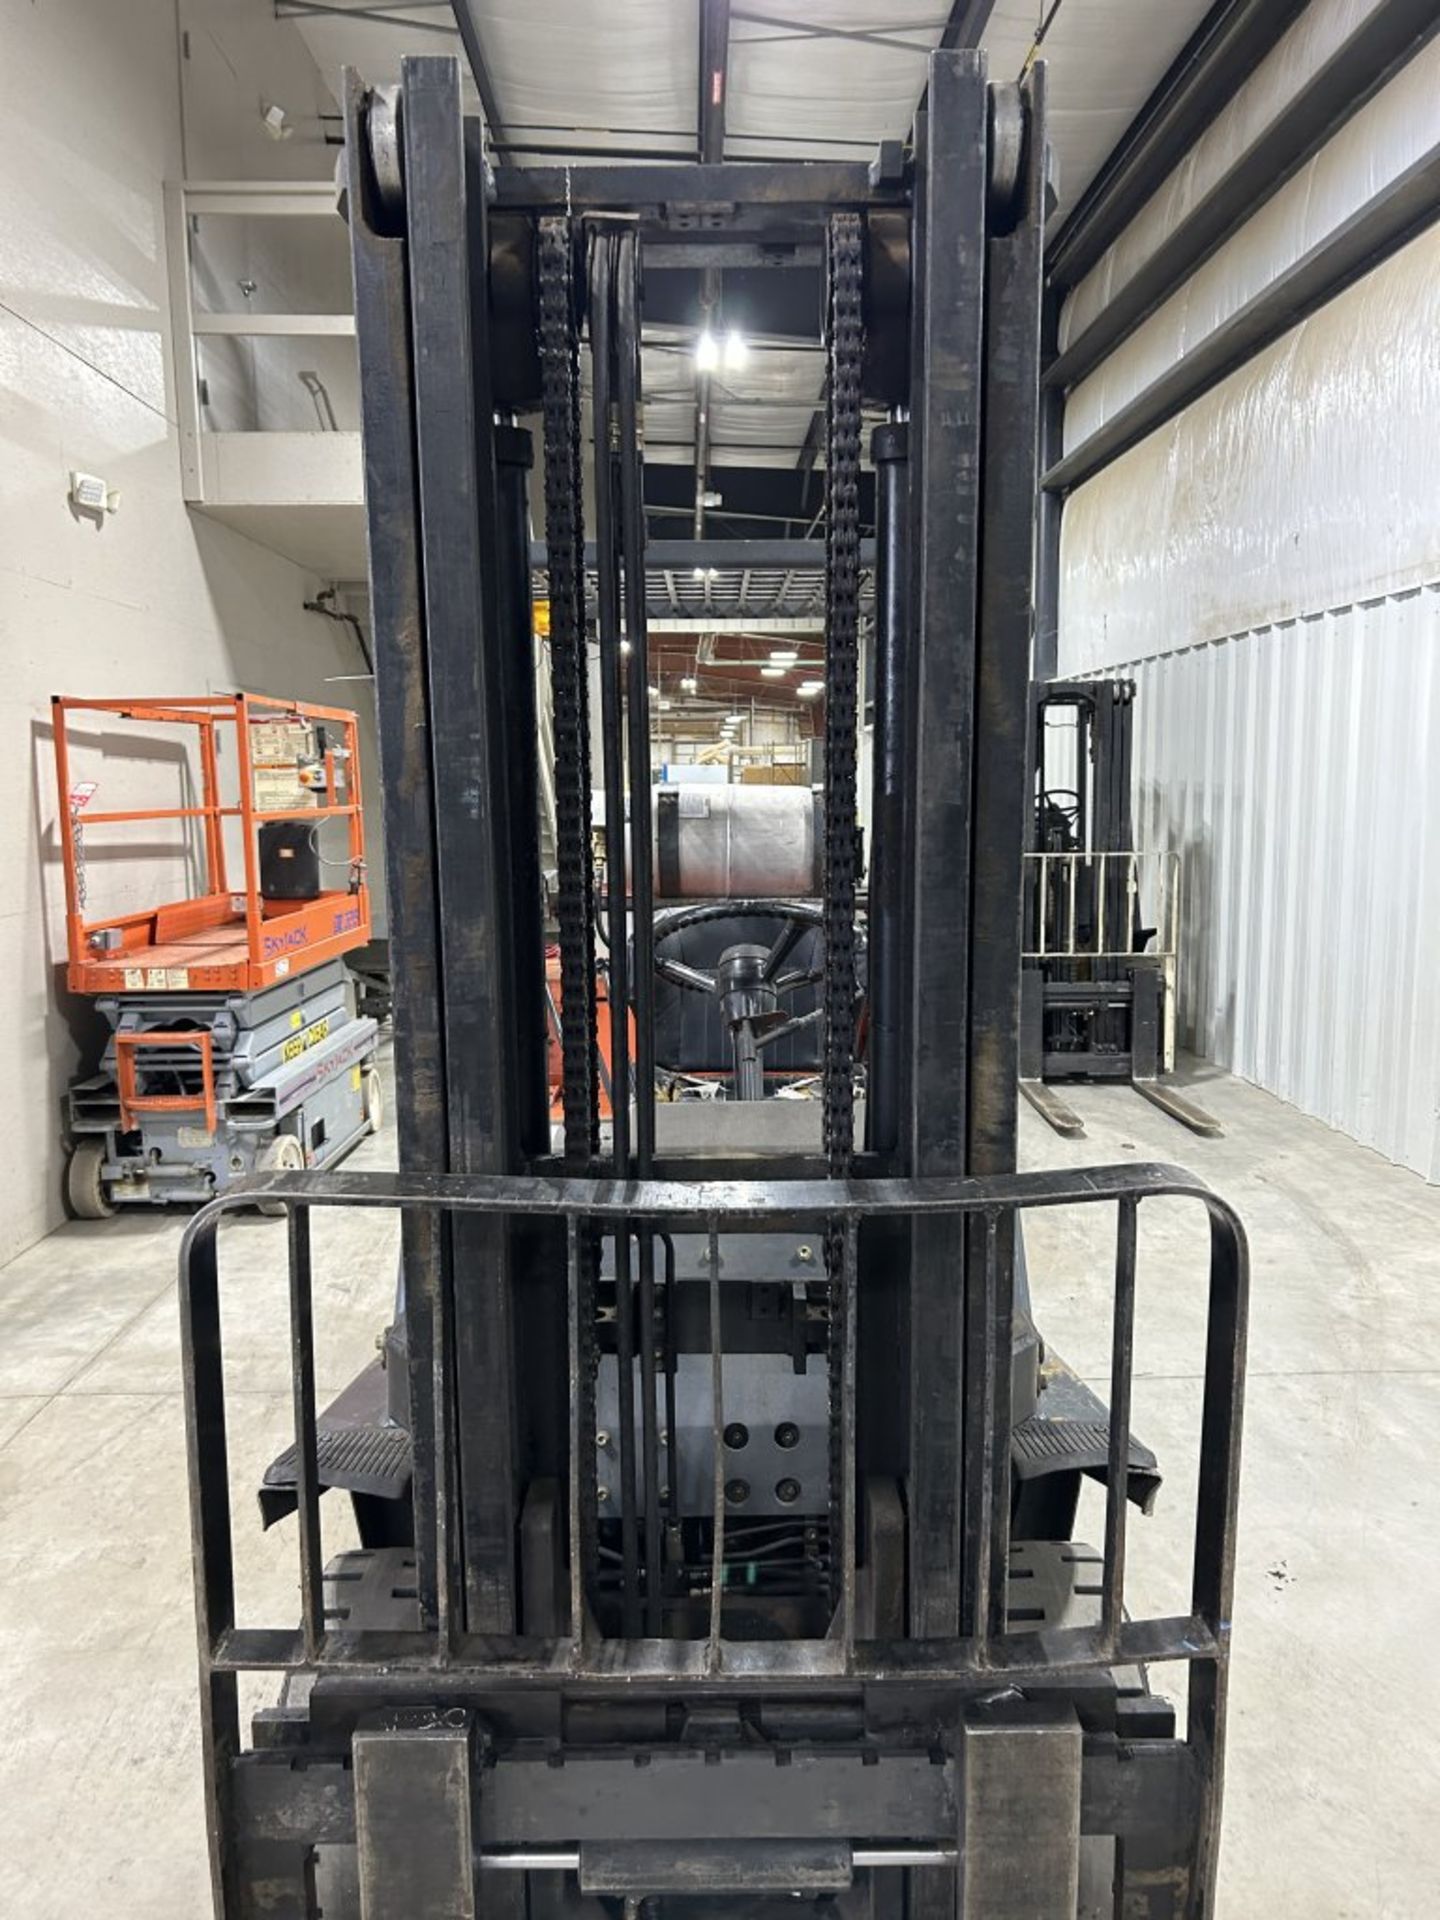 TOYOTA FGC35 FORKLIFT, 2-STAGE, 8000 LBS CAPACITY, LP GAS, SOLID TIRES, 48'' FORKS, 5626 HOURS - Image 8 of 22